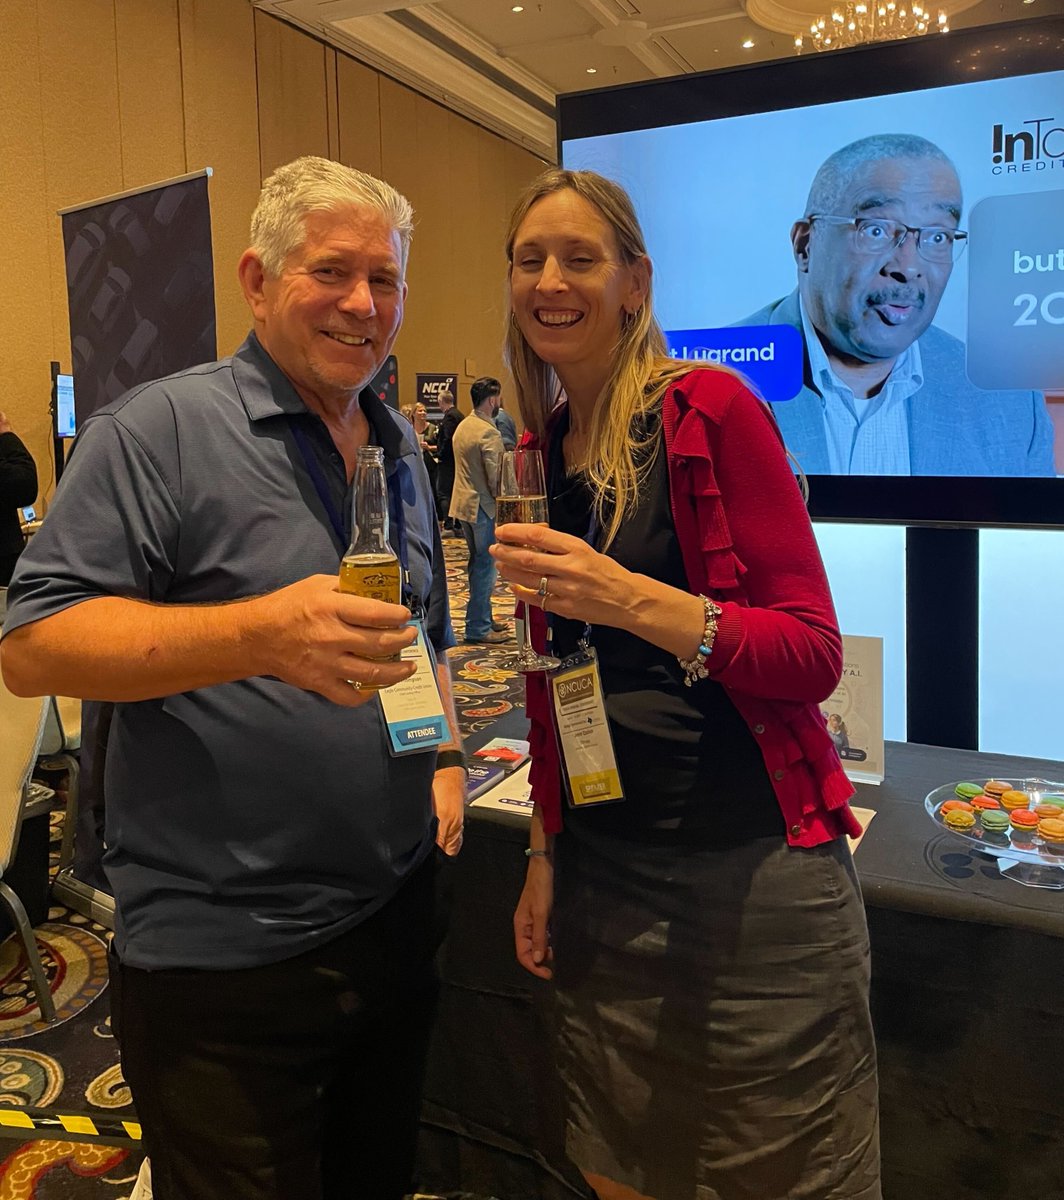 Our team is having a blast at #NCUCA 🎊 Thank you to the wonderful #creditunion leaders who've stopped by our booth to chat about the recent buzz around #AI and how to fight against an increase in #fraud 🤝